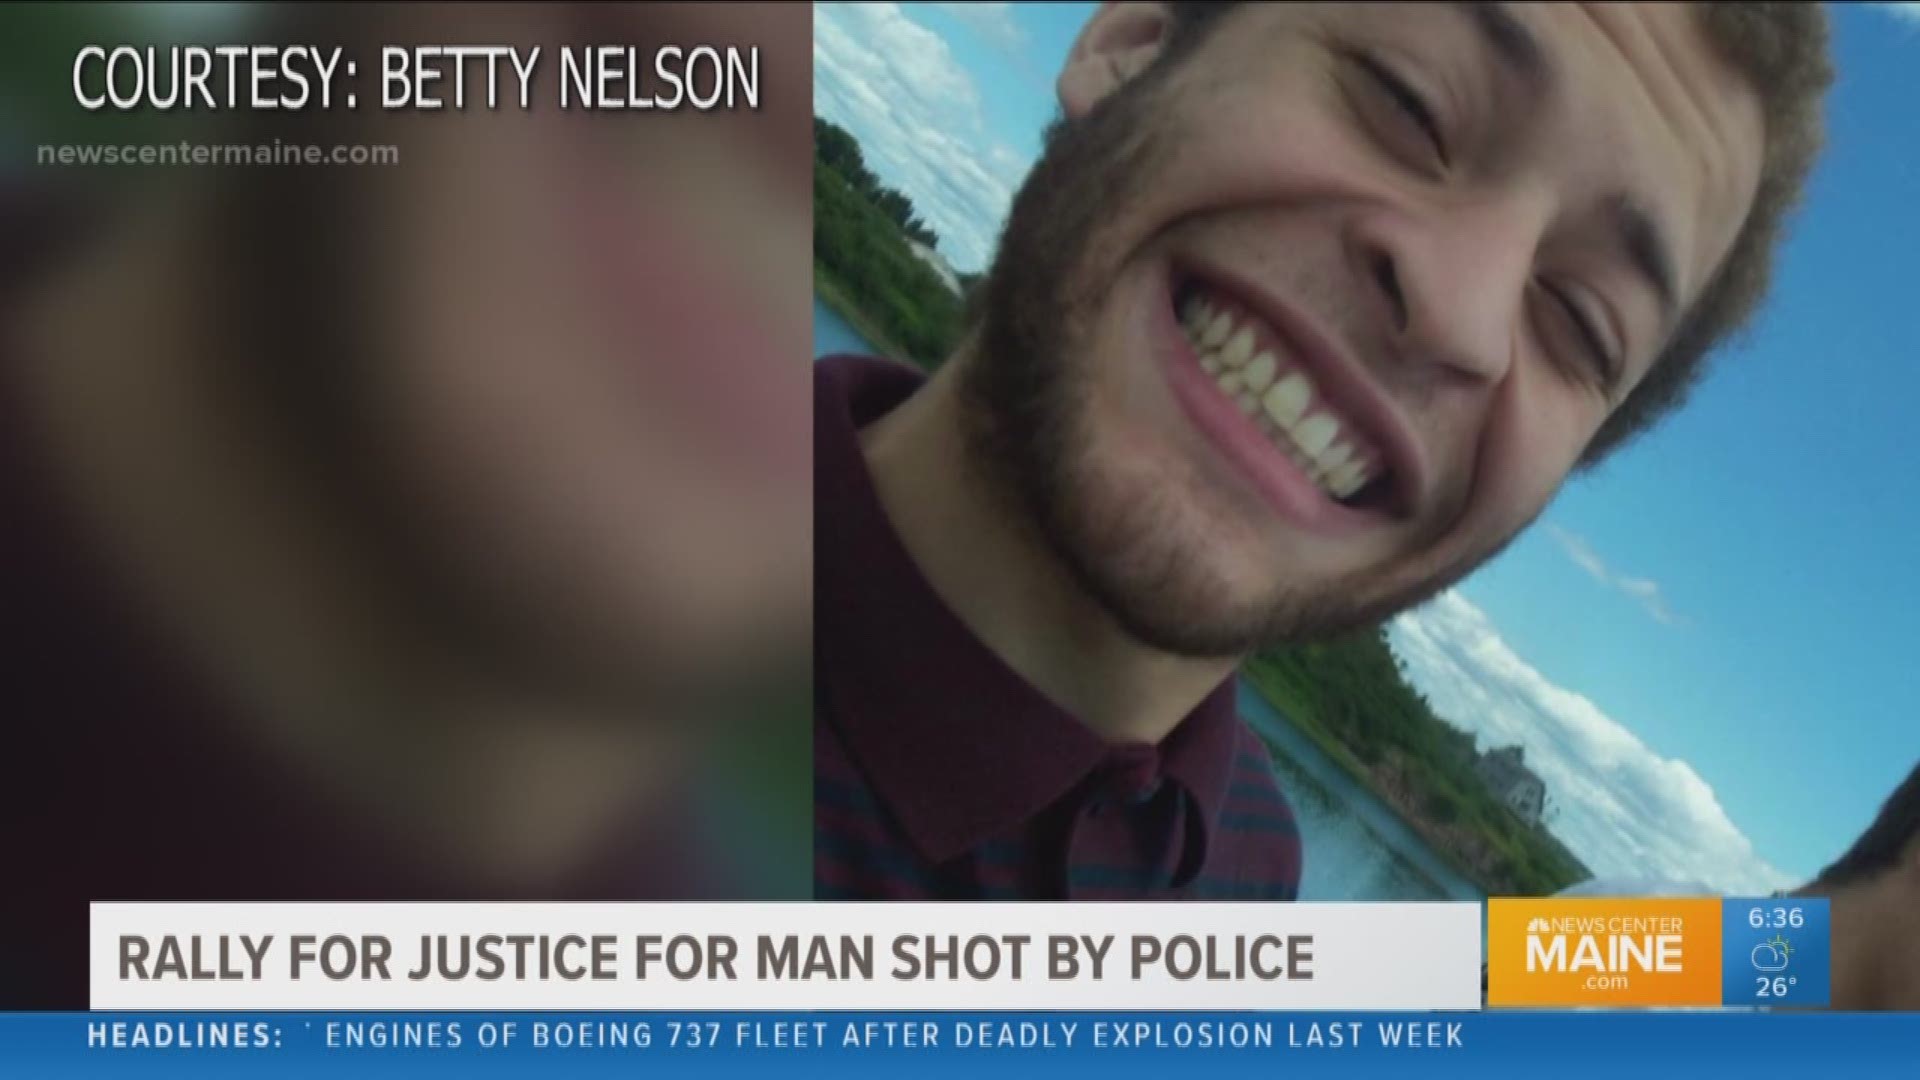 Katie Bavoso reports on rally for justice for man shot by police